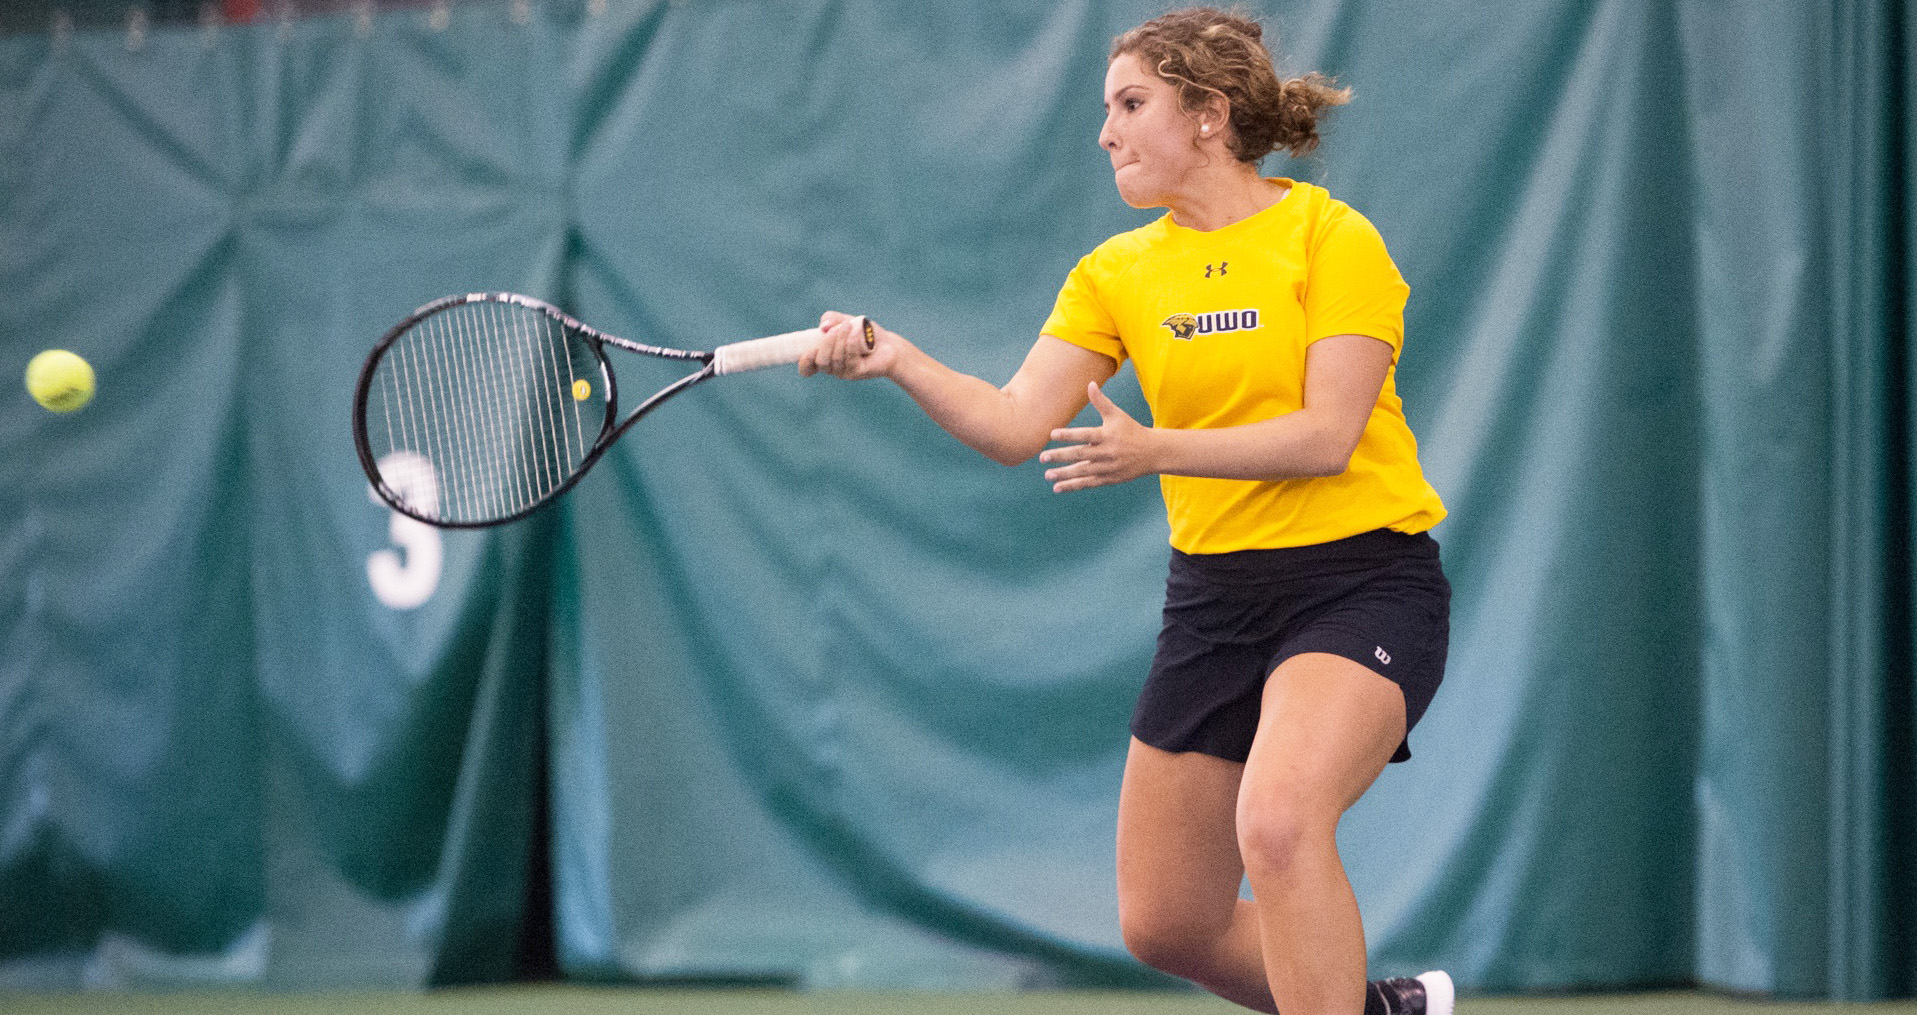 Hannah Peters (pictured) and Bailey Sagen suffered a 9-7 loss to UW-La Crosse's No. 1 doubles team.